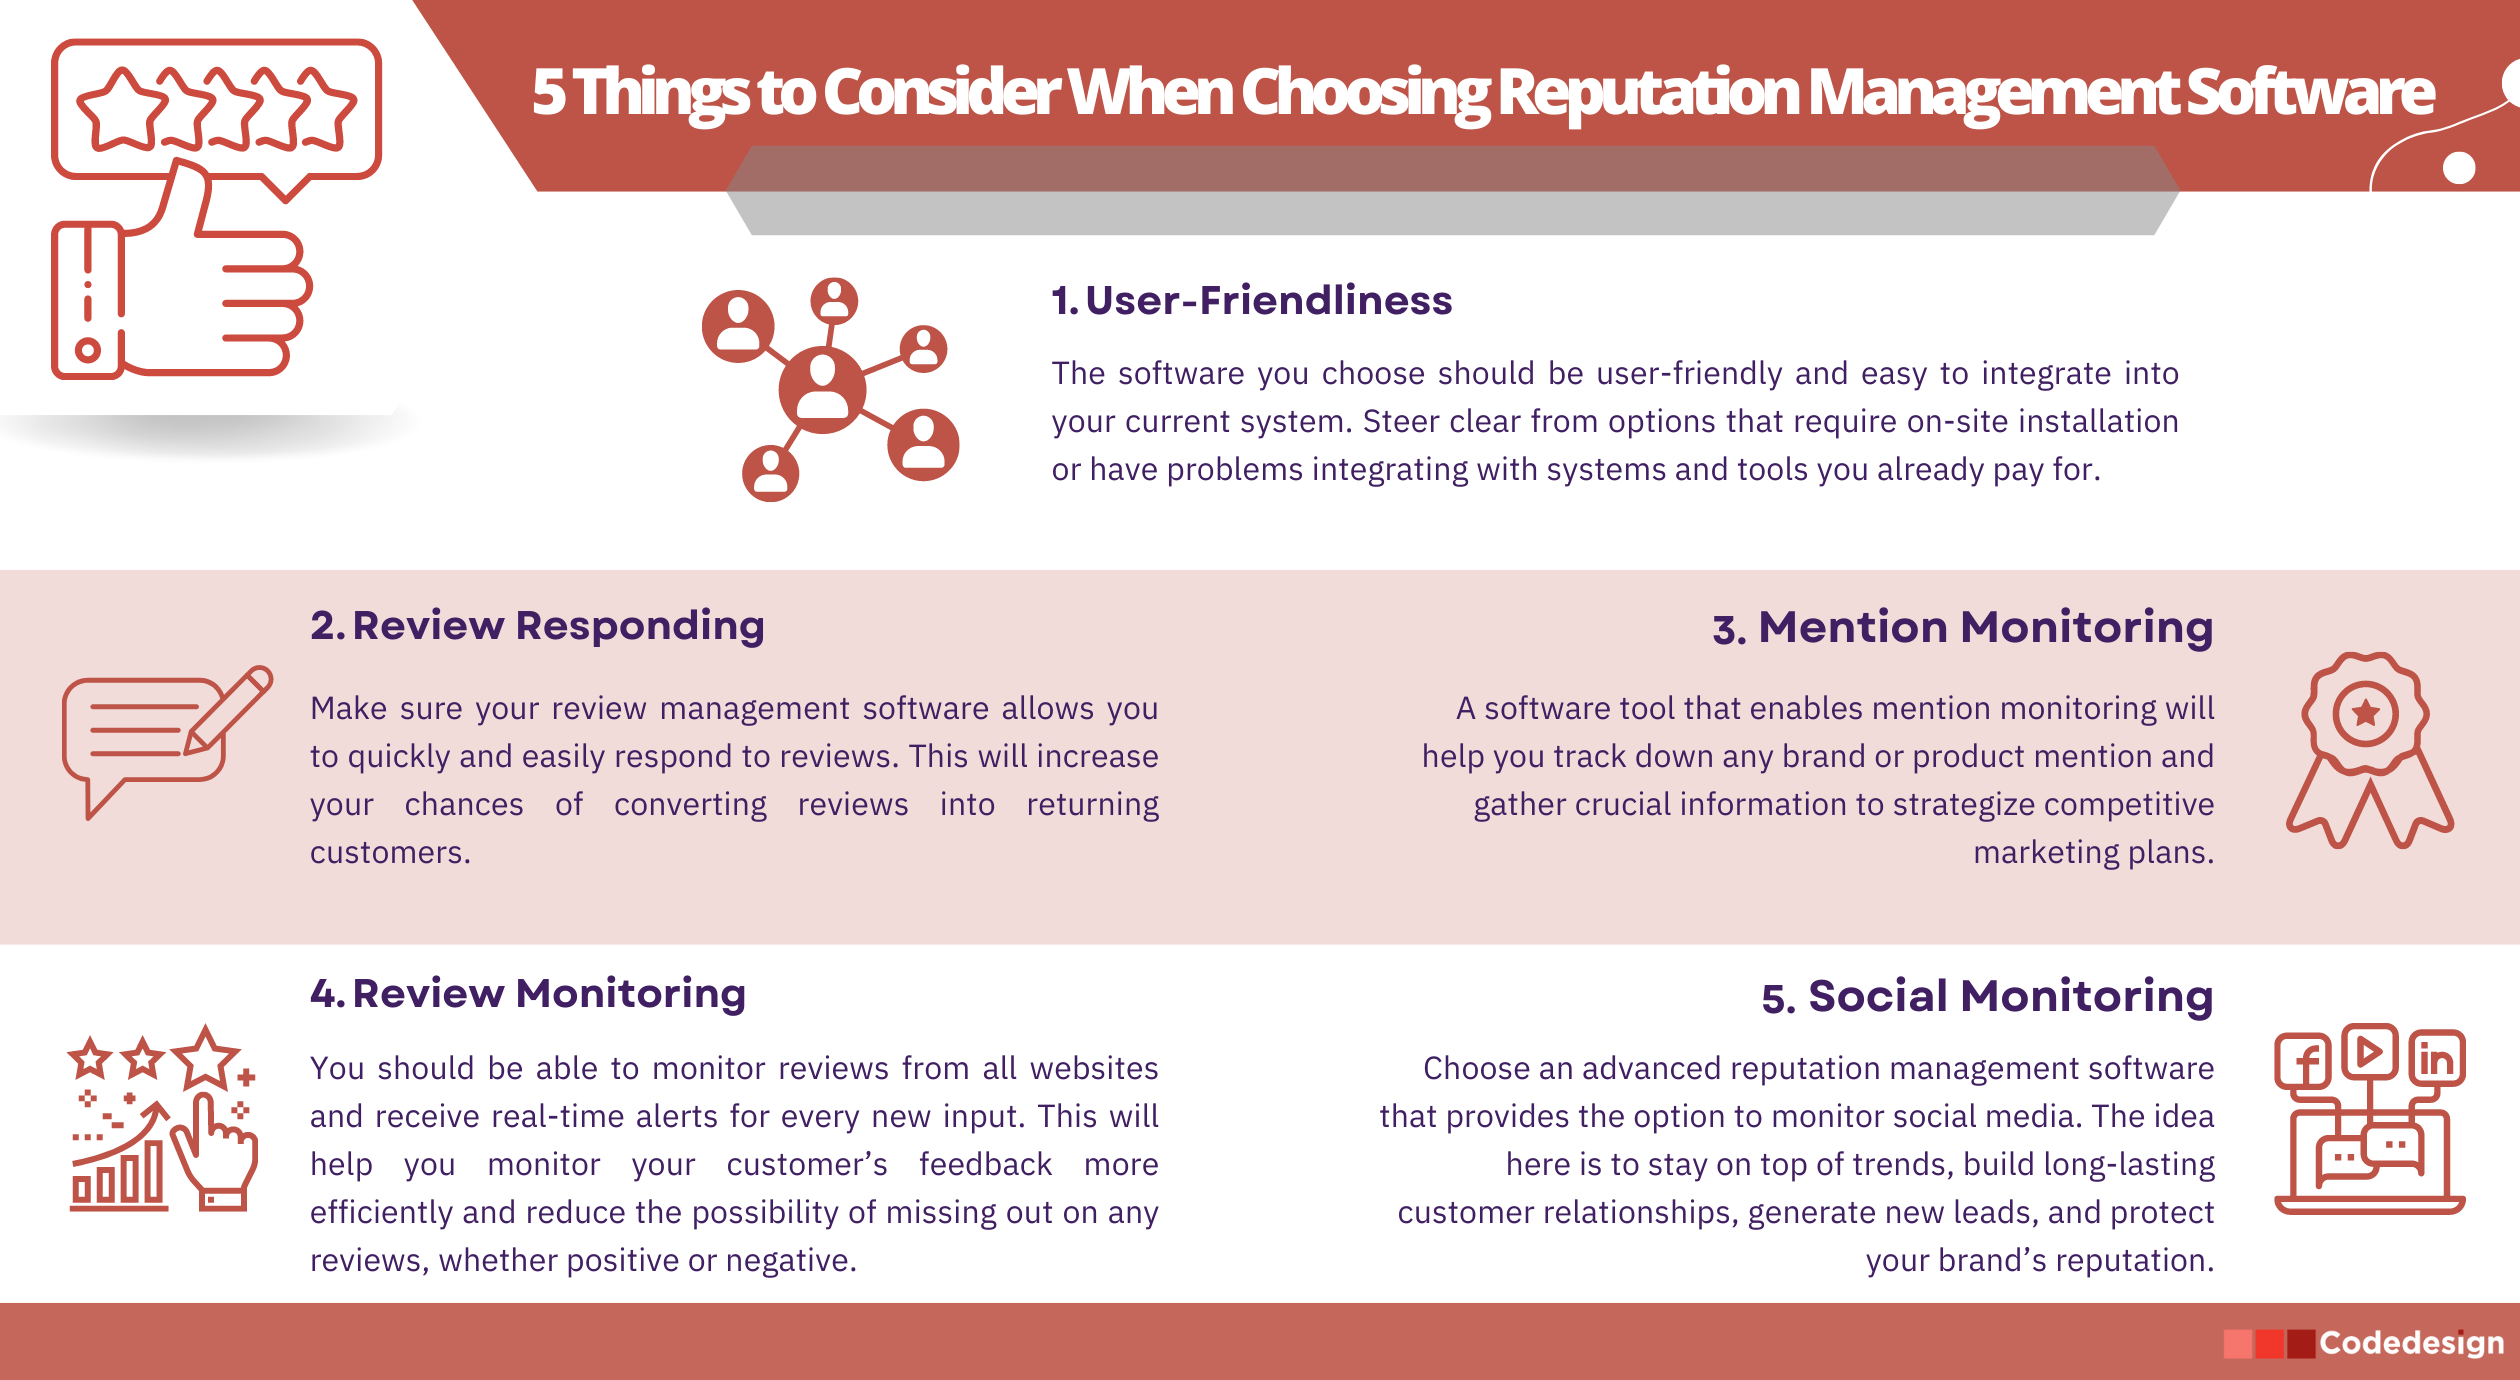 5 Things to Consider When Choosing Reputation Management Software